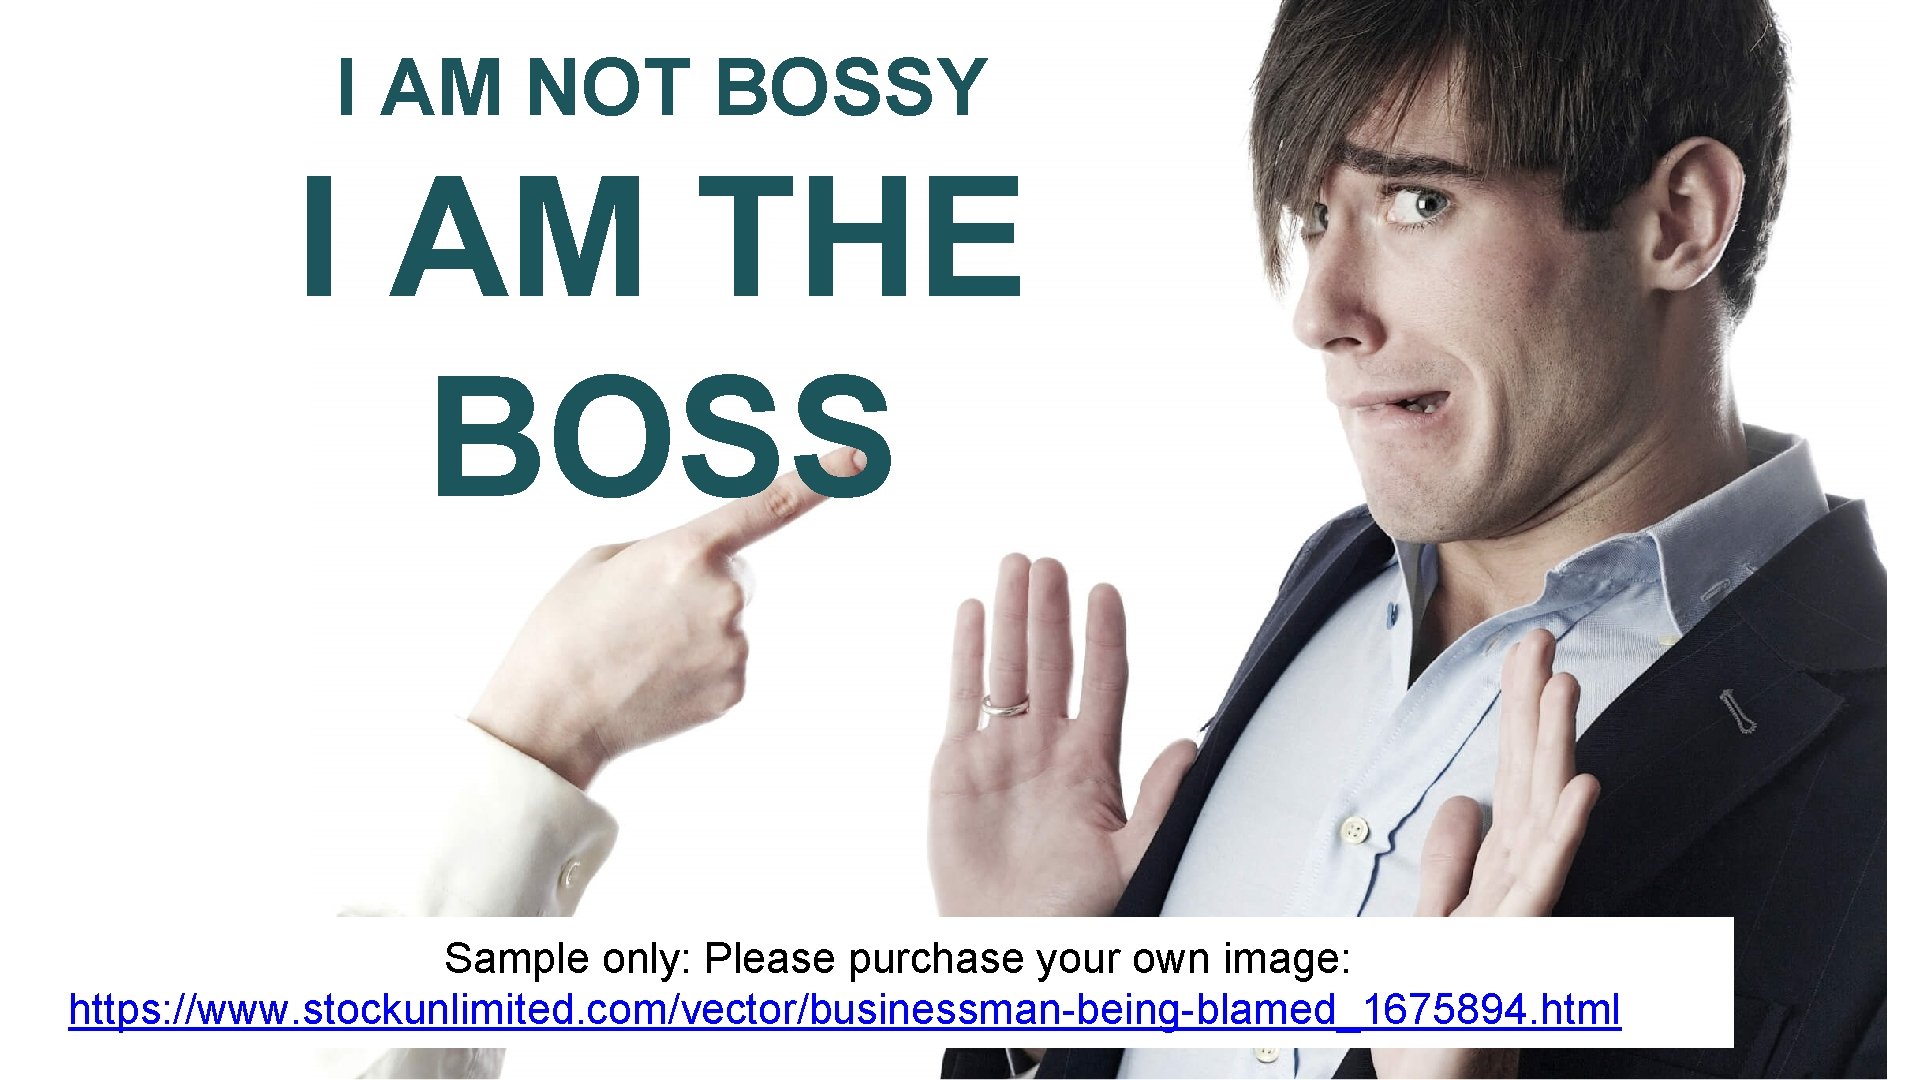 I AM NOT BOSSY I AM THE BOSS Sample only: Please purchase your own